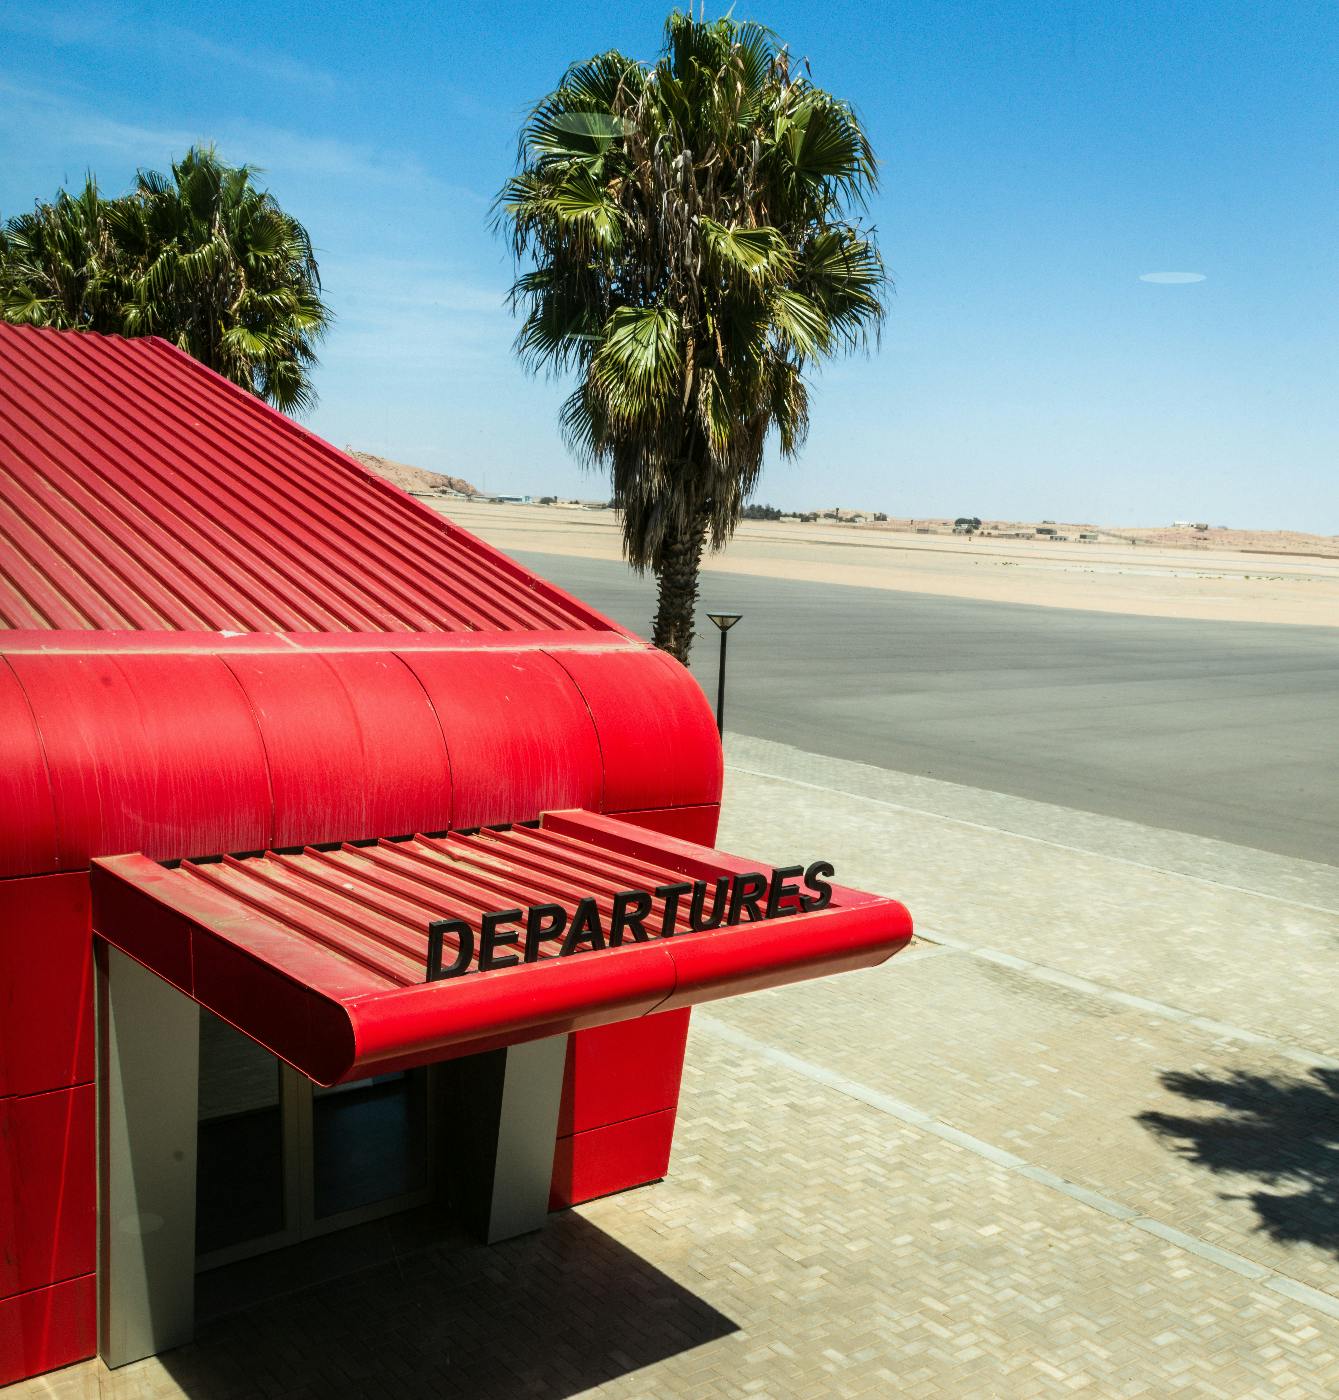 A red building by a palm tree with Departures written on the awning